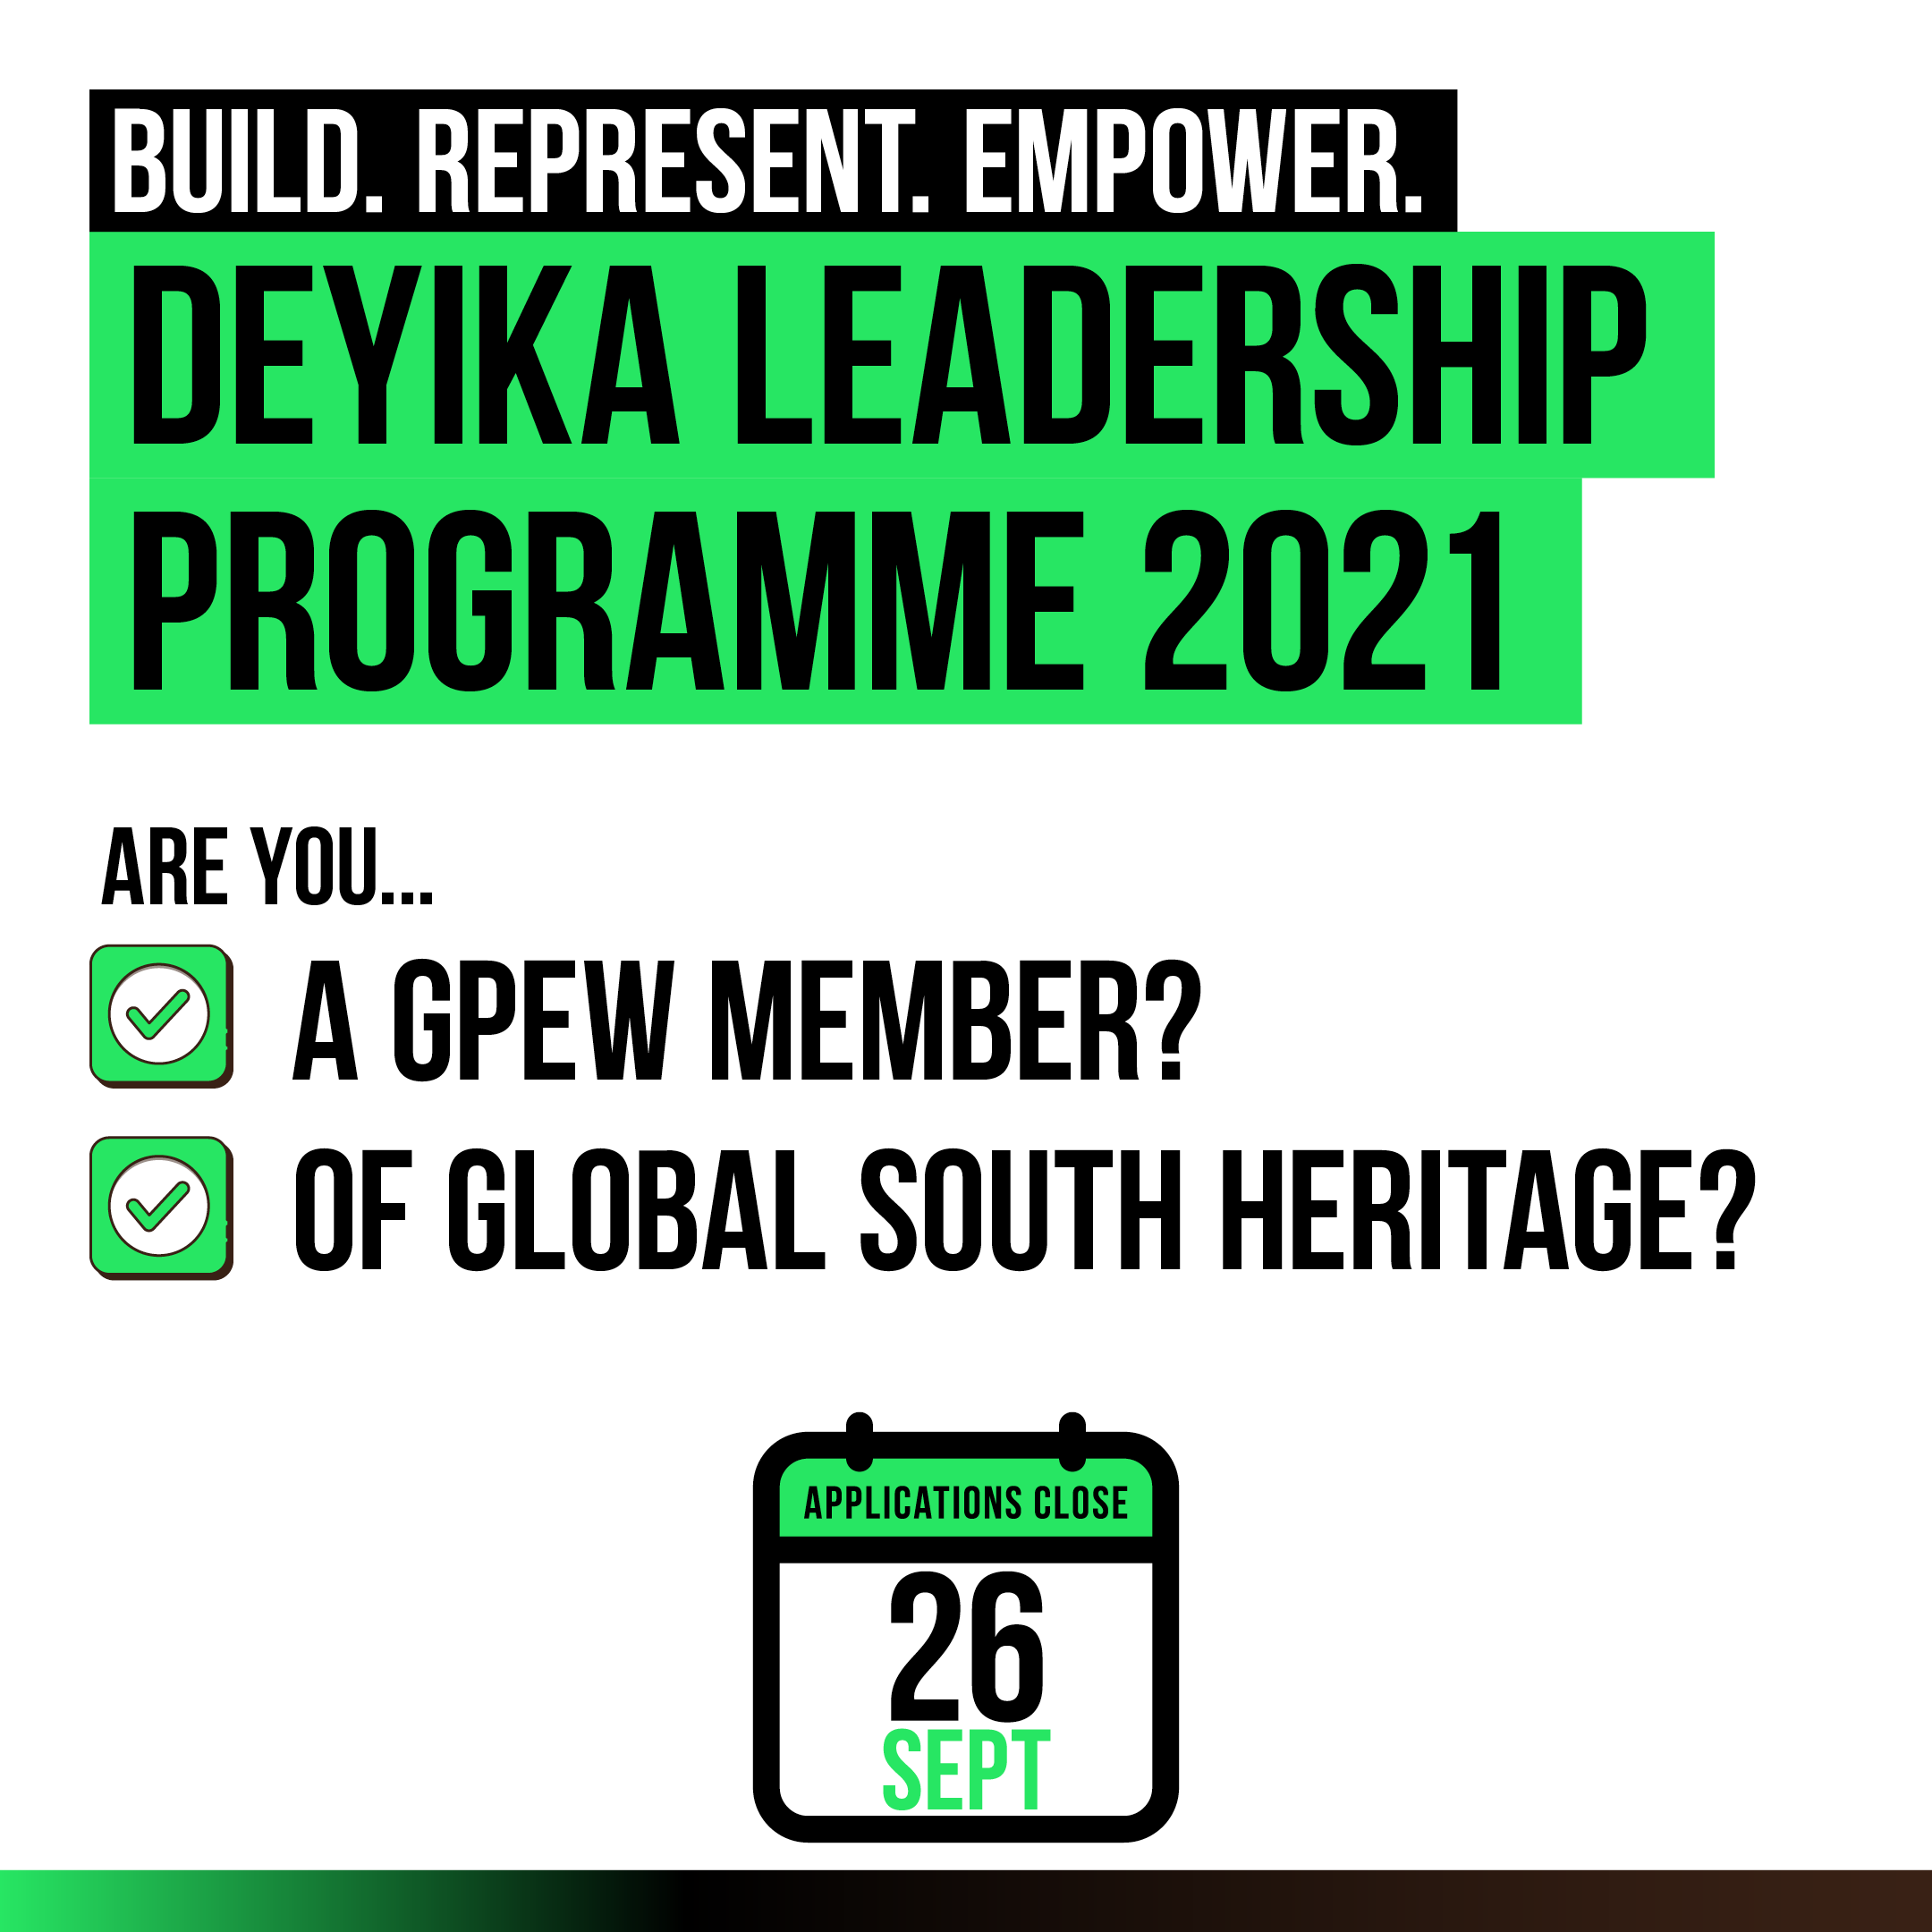 BUILD. REPRESENT. EMPOWER. DEYIKA LEADERSHIP PROGRAMME 2021 ARE YOU... A GPEW MEMBER? OF GLOBAL SOUTH HERITAGE? APPLICATIONS CLOSE 26 SEPT